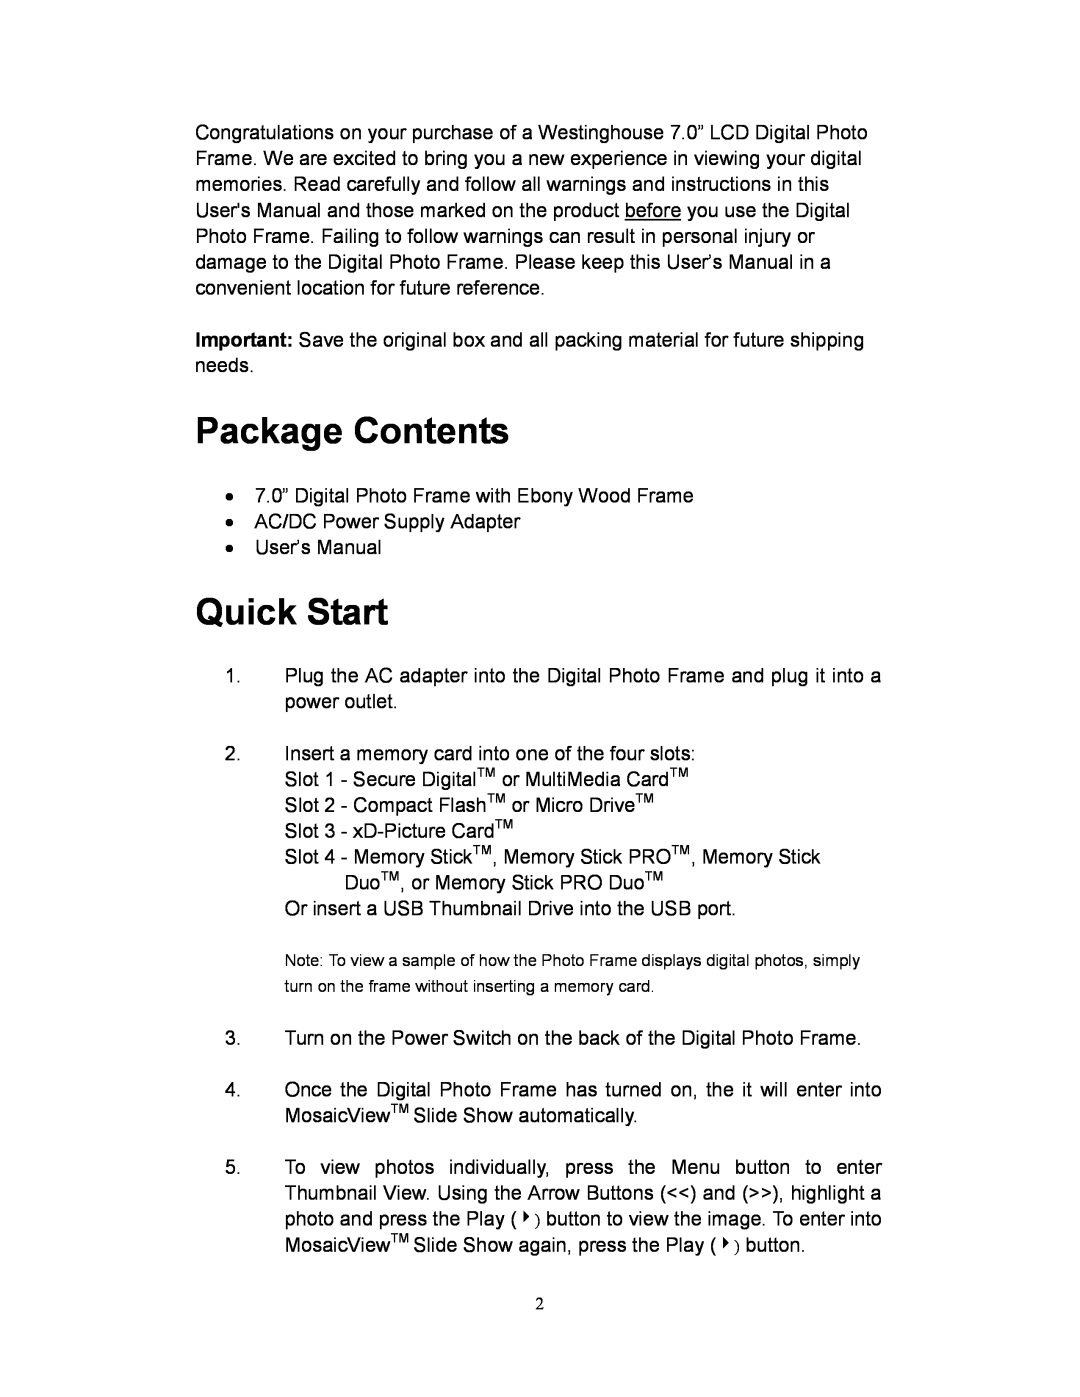 Westinghouse DPF-0701 user manual Package Contents, Quick Start 